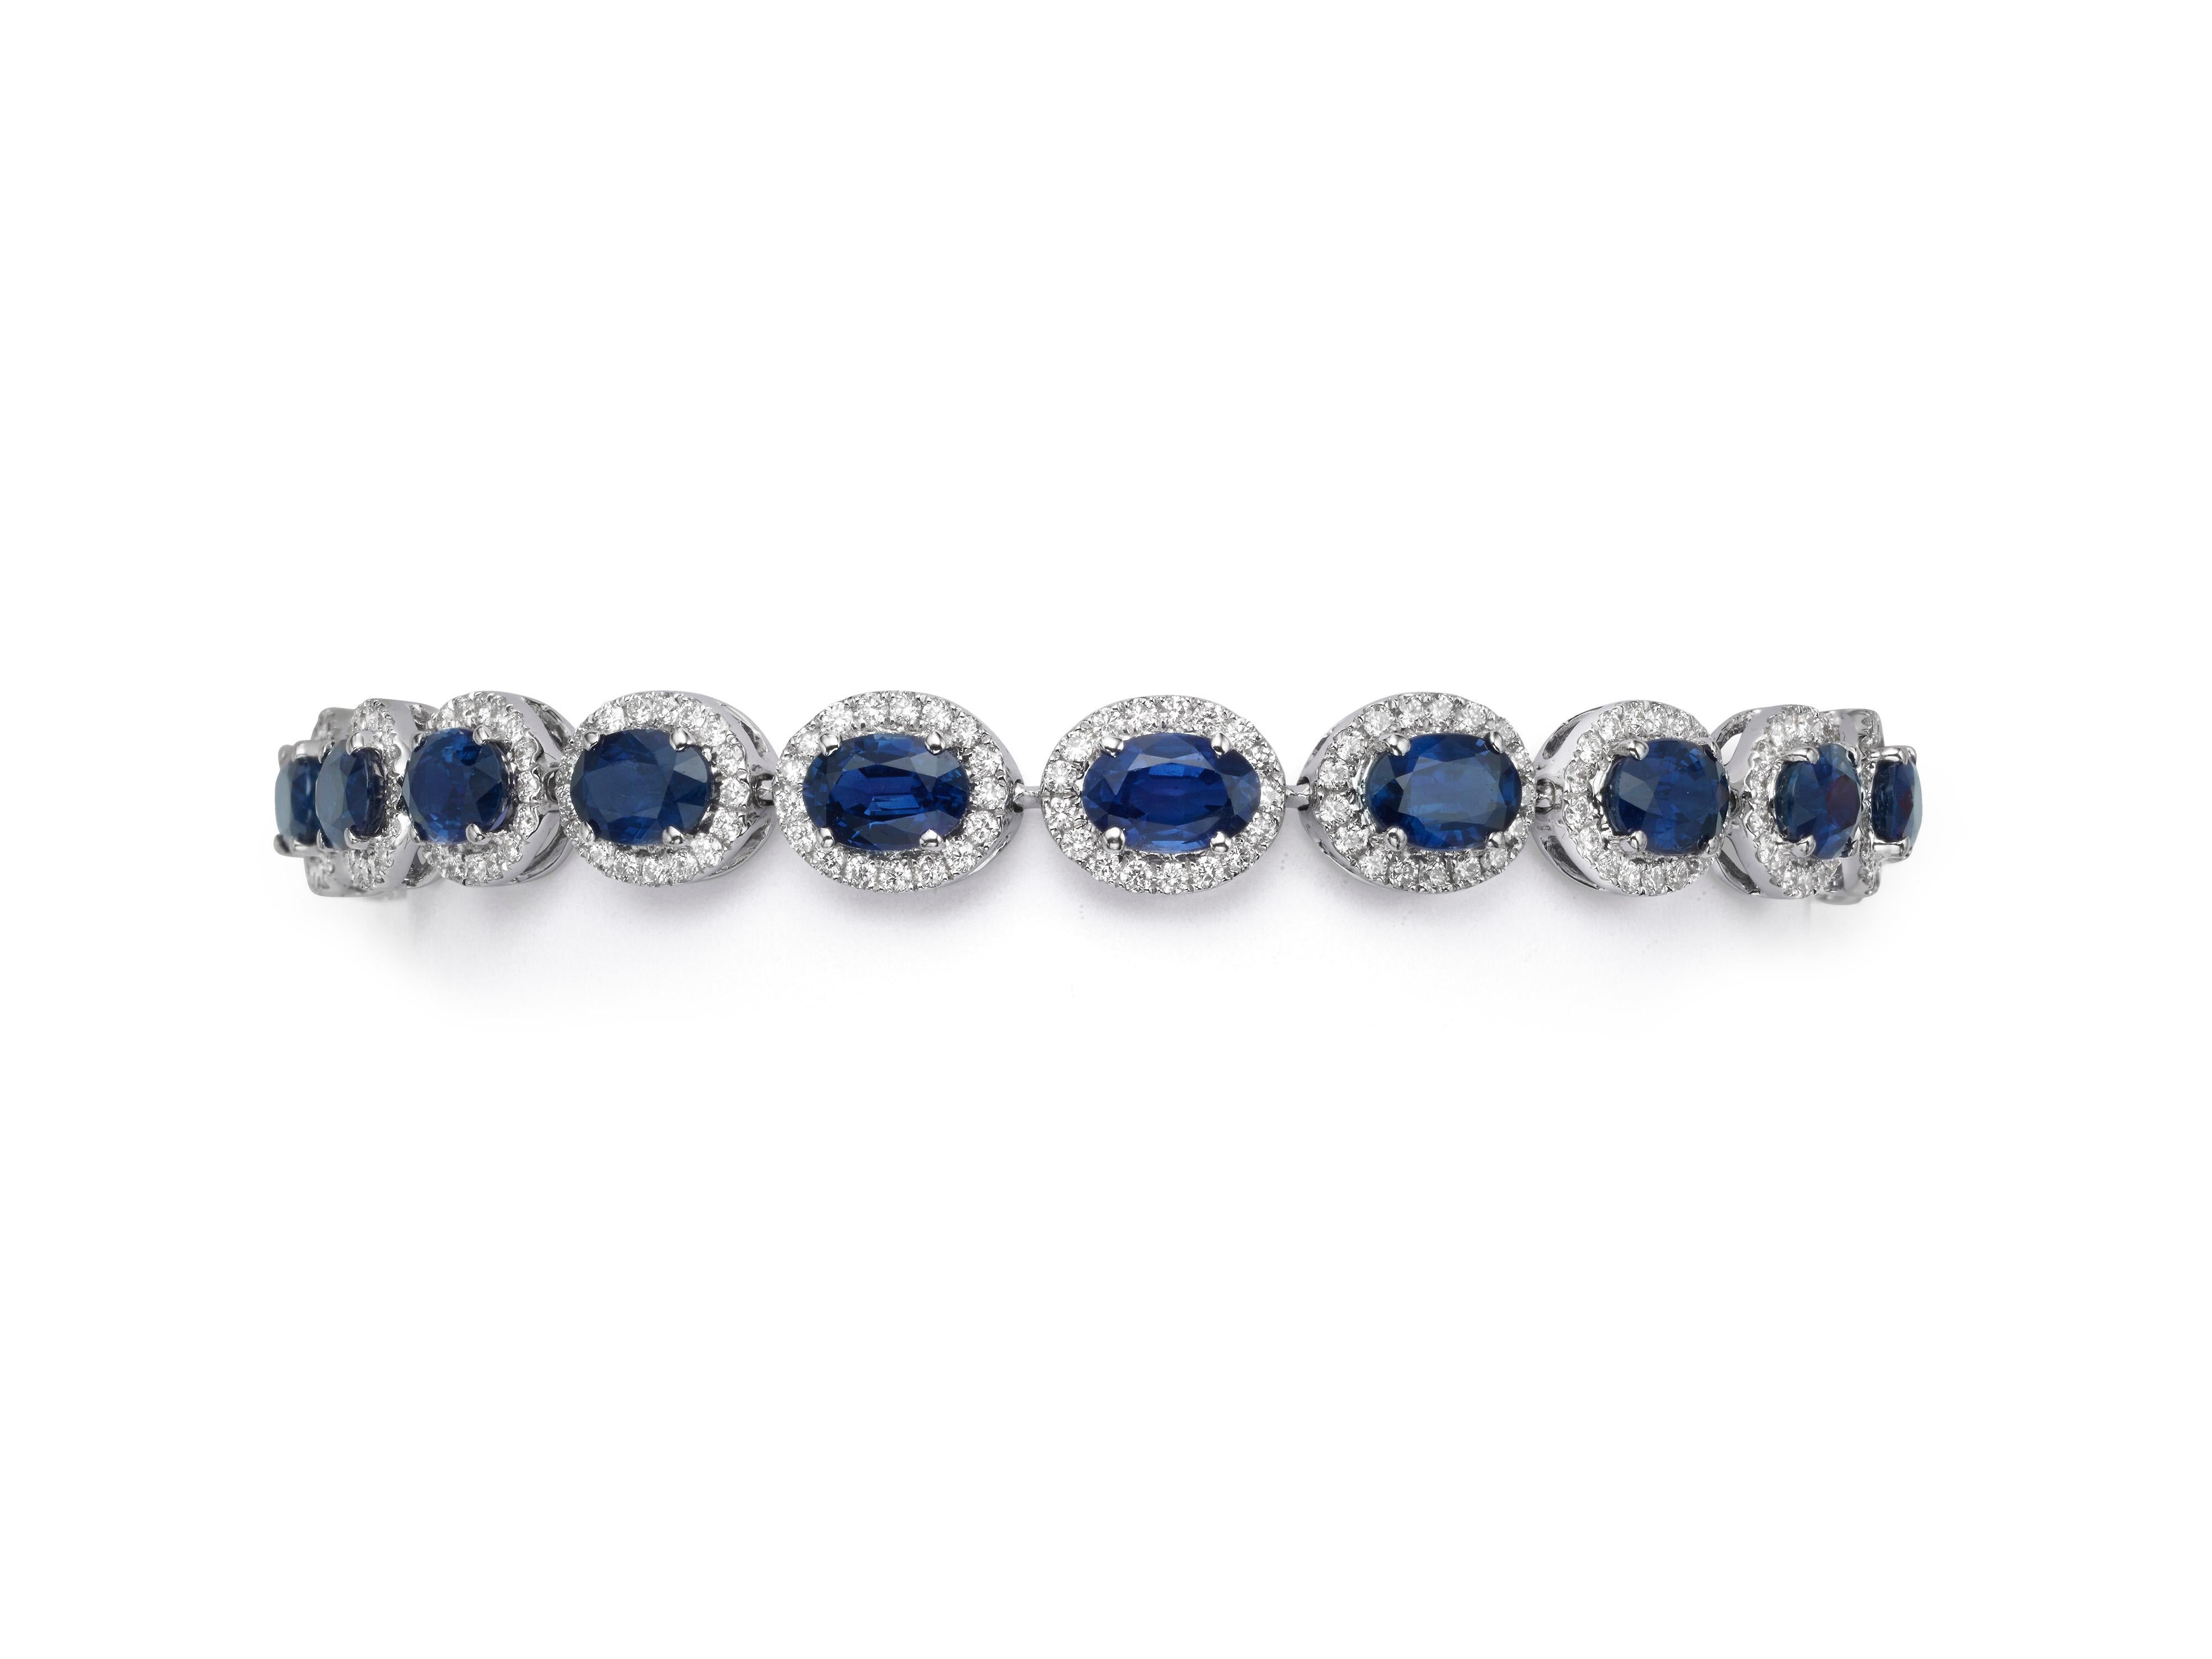 A sapphire and diamond cluster bracelet handcrafted from 18K white gold.  An oval blue sapphire sits in the center of each link and is encircled by a glittering halo of white diamonds.  The vibrant blue sapphires have a total weight of 11.90 carats